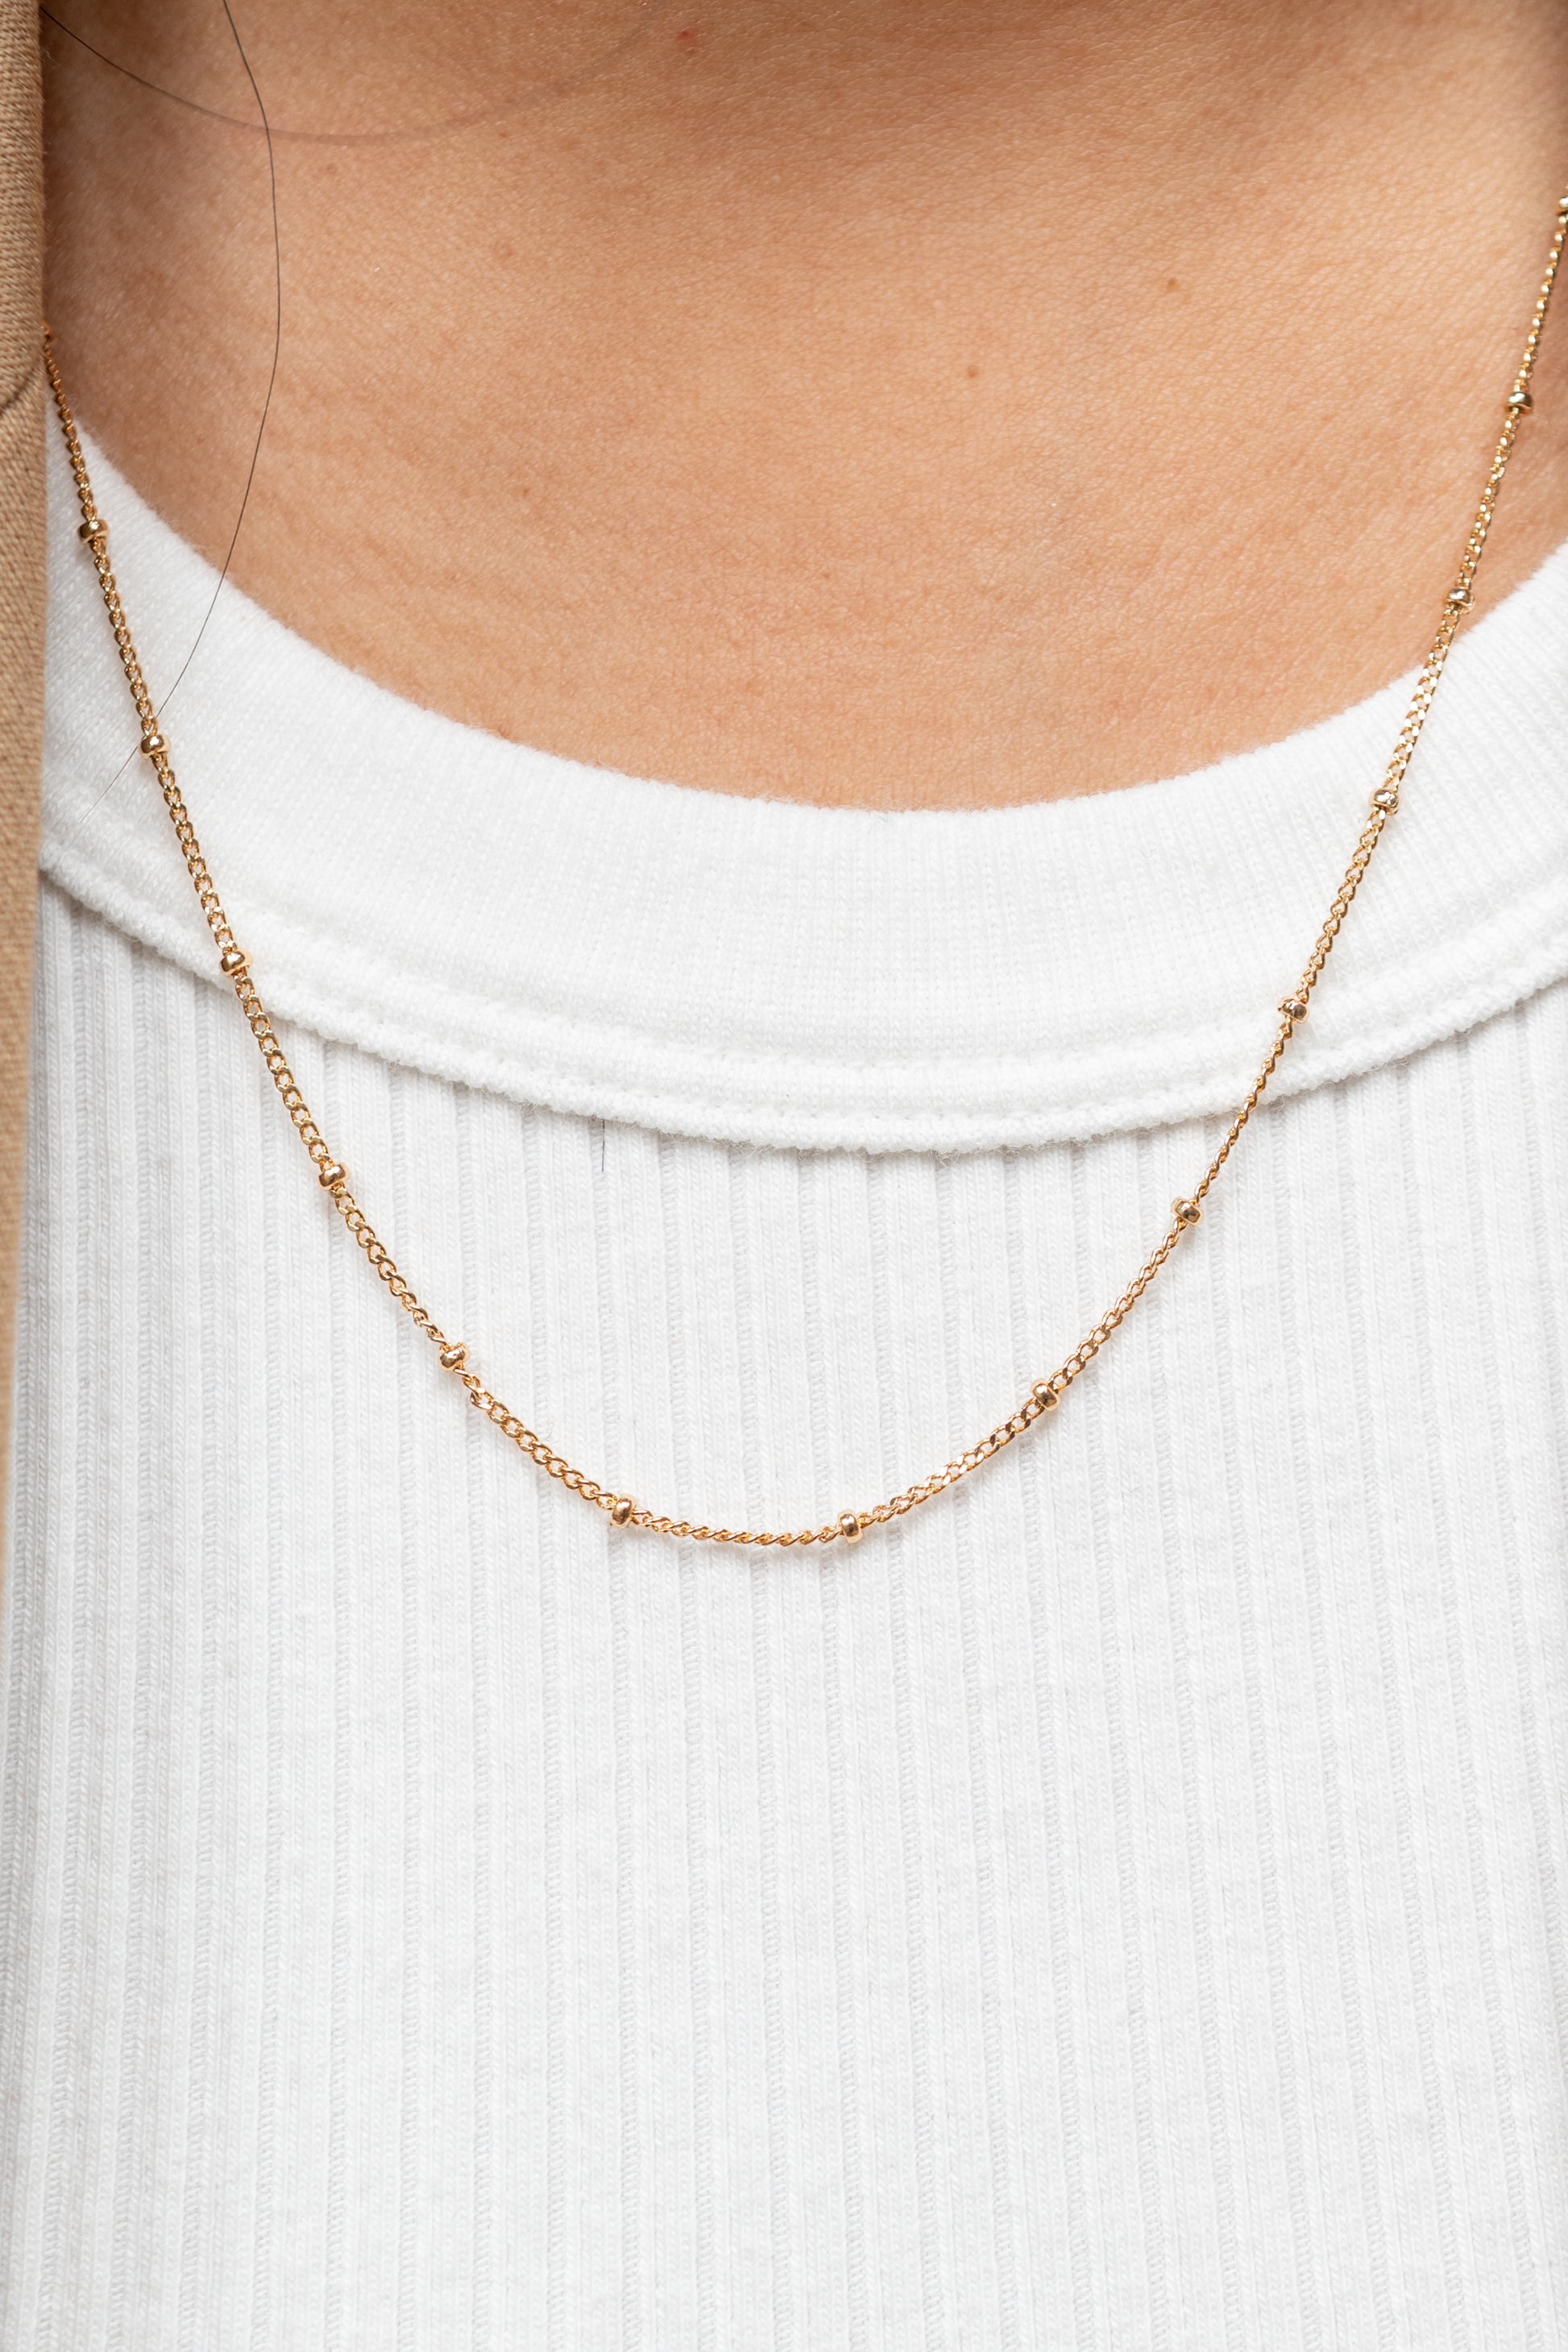 Harma Essentials 18k gold plated Petite Satellite Bead Chain Necklace